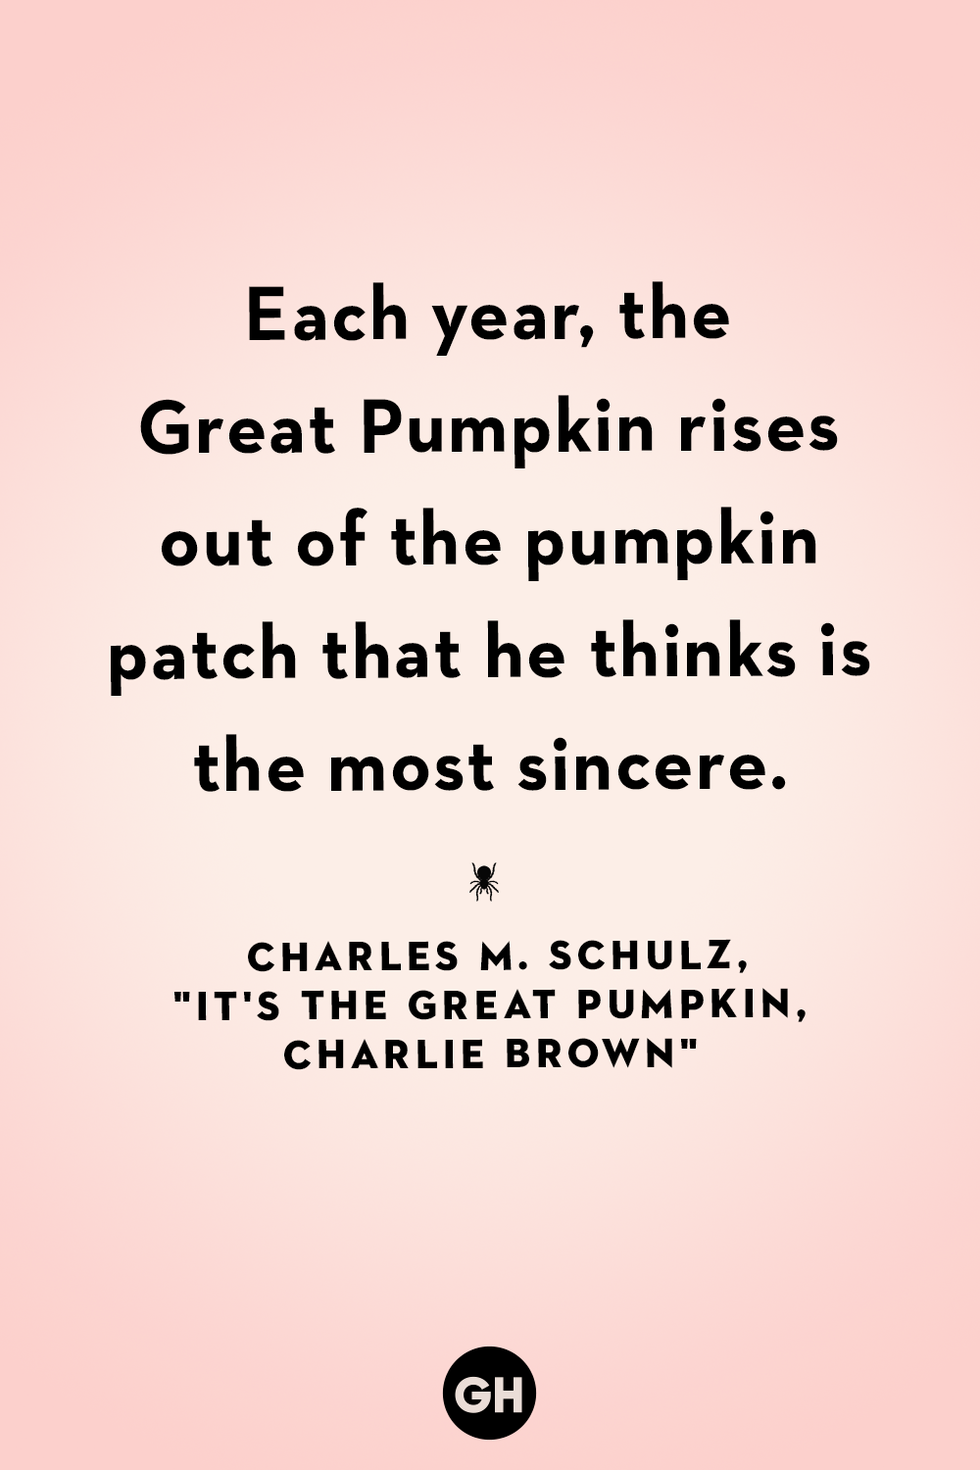 50 Best Halloween Quotes 2023 - Spooky Sayings to Wish a Happy Halloween